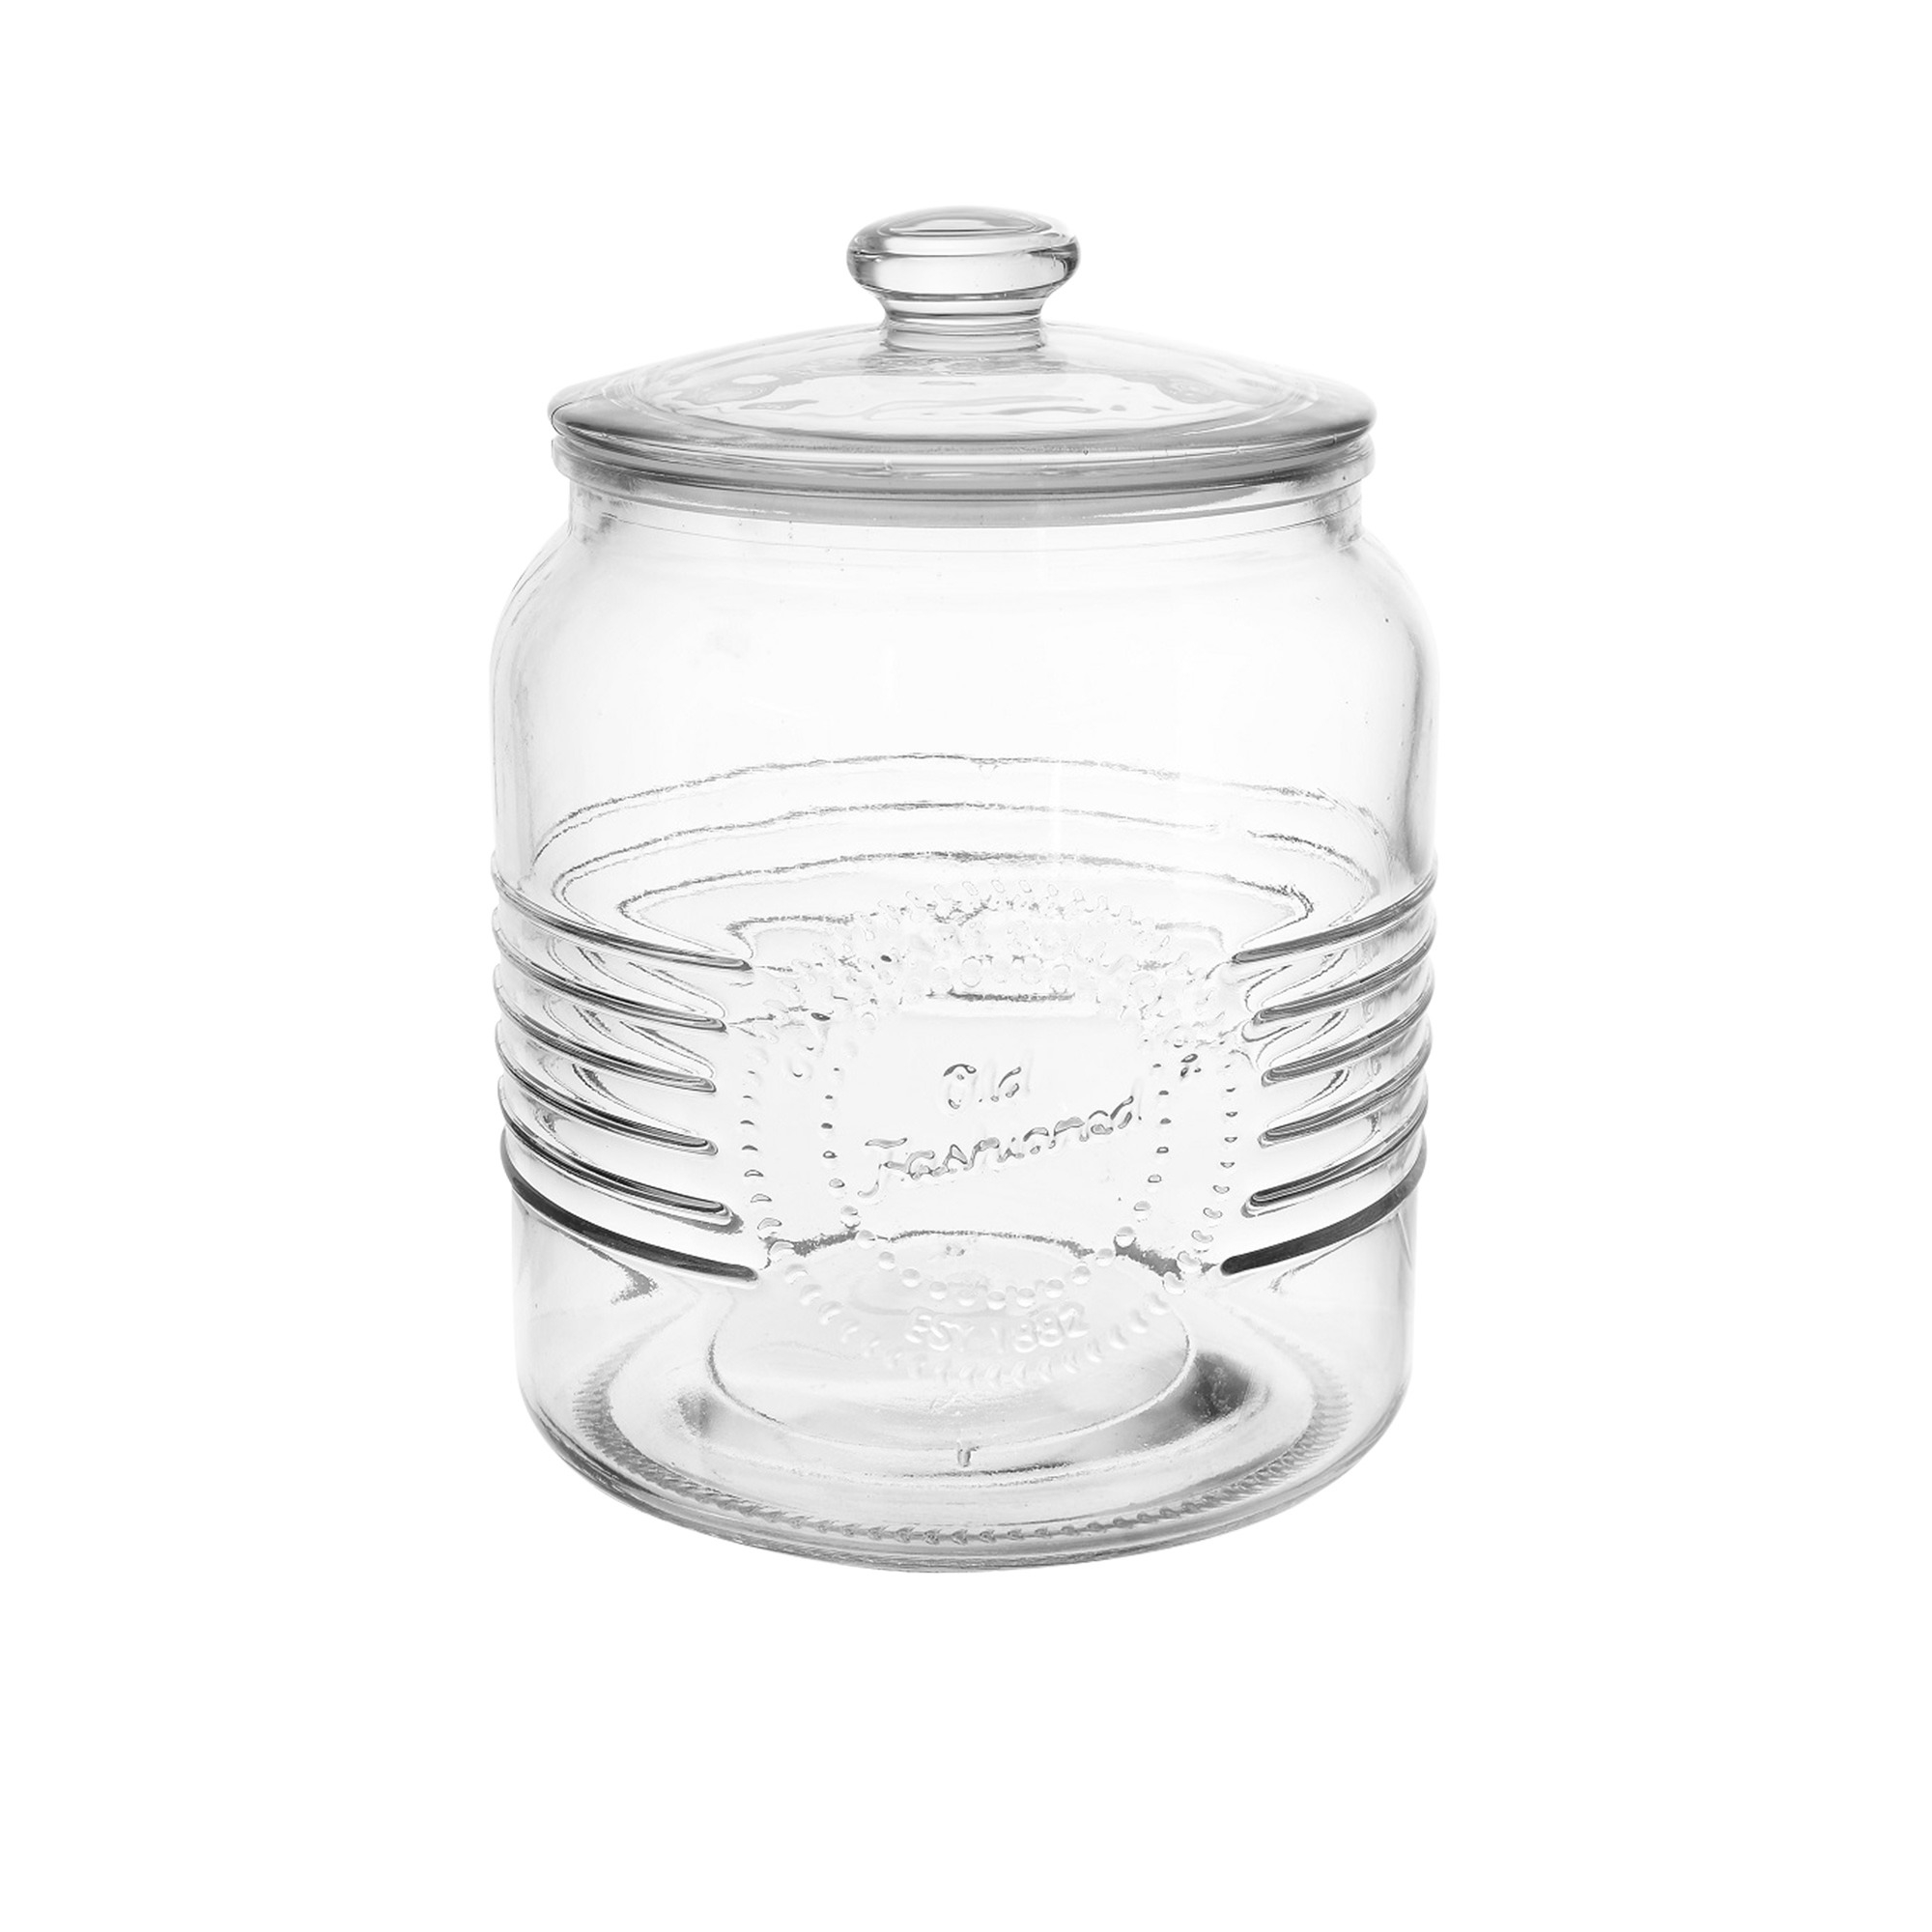 Salisbury & Co Old Fashioned Cookie Jar with Glass Lid 2L Image 1